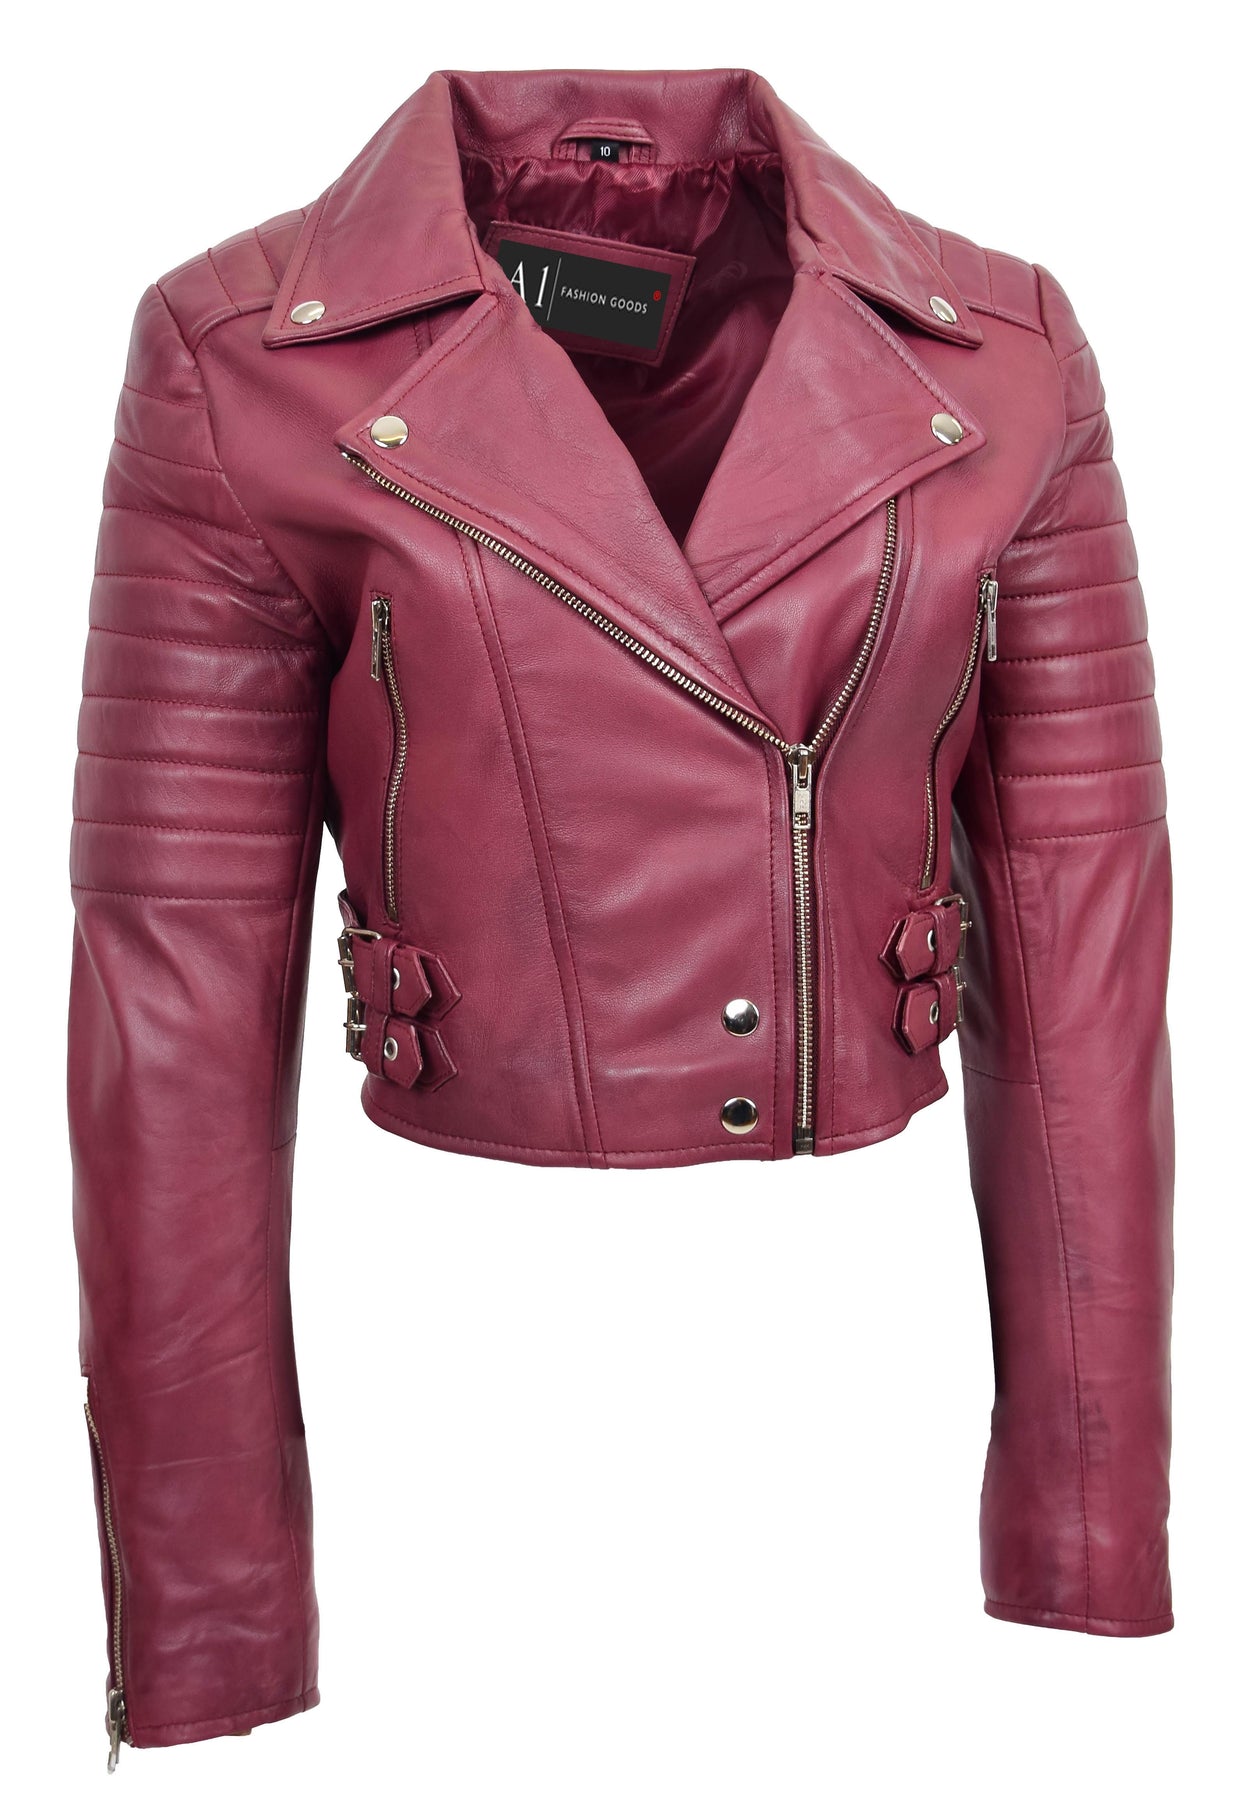 Womens Cropped Bustier Style Leather Jacket Burgundy